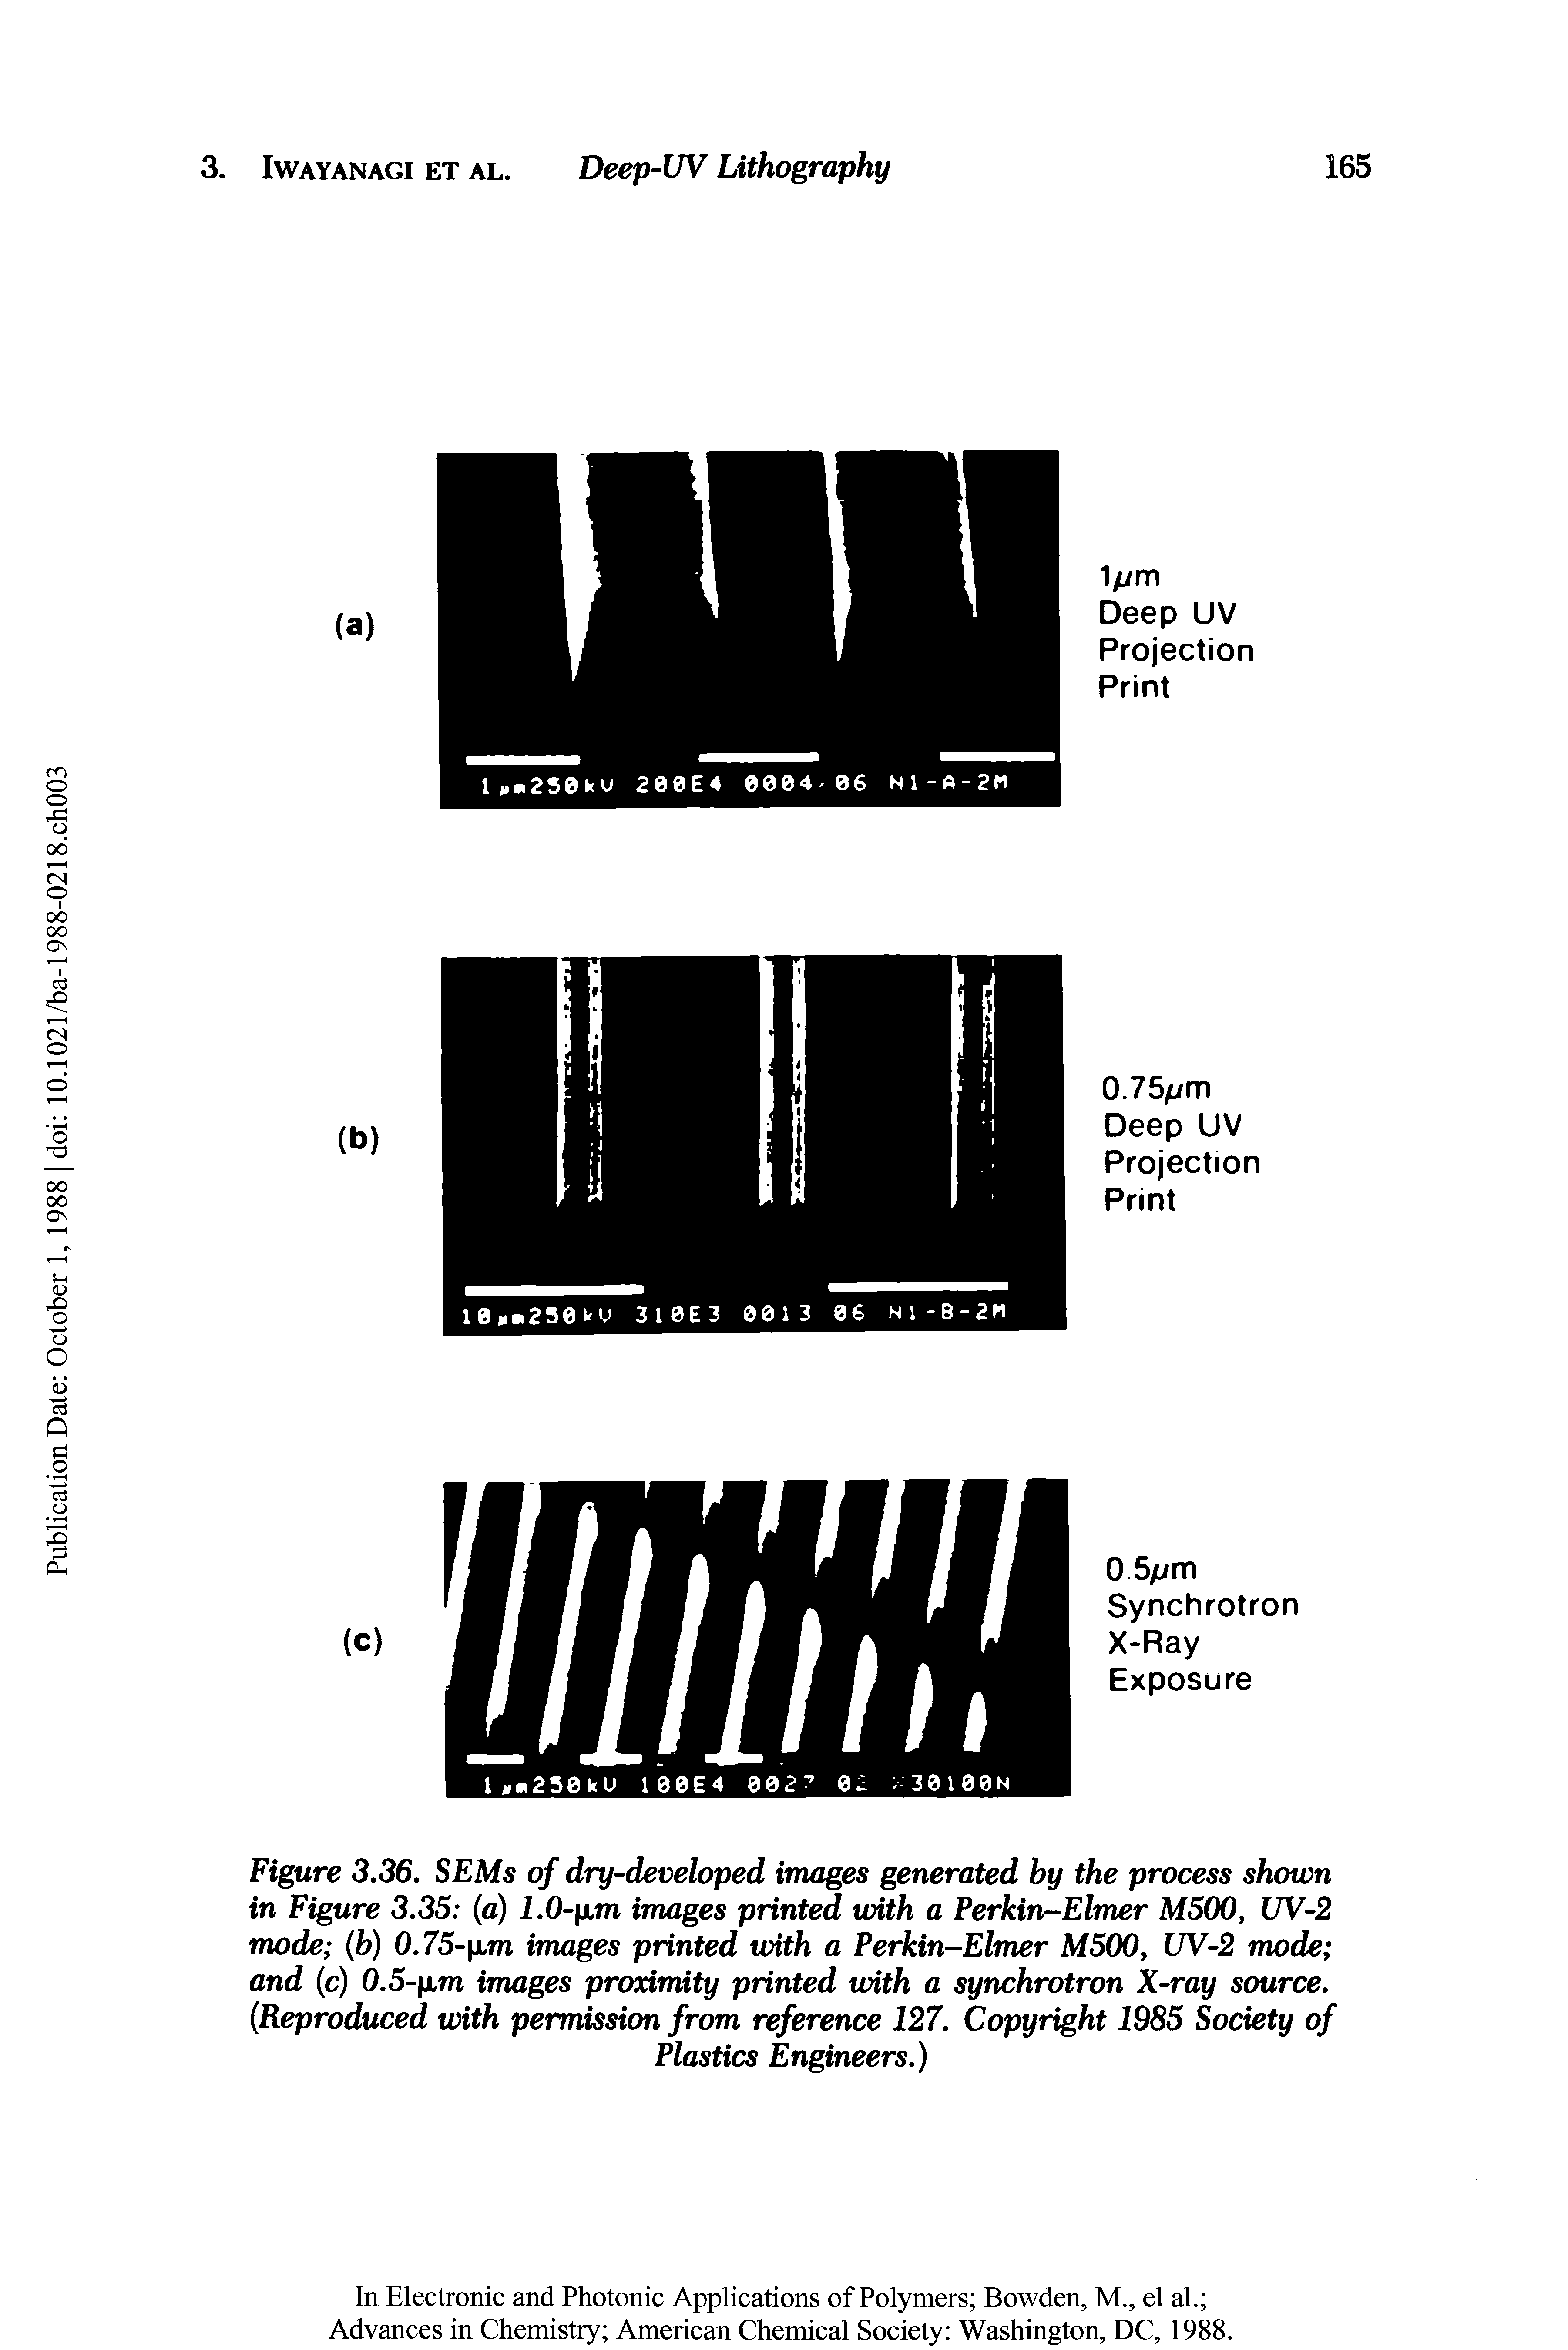 Figure 3.36. SEMs of dry-developed images generated by the process shown in Figure 3.35 a) J.0- xm images printed with a Perkin-Elmer M500, UV-2 mode (b) 0.75-p.m images printed with a Perkin-Elmer M500, UV-2 mode and (c) 0.5- xm images proximity printed with a synchrotron X-ray source. (Reproduced with permission from reference 127. Copyright 1985 Society of...